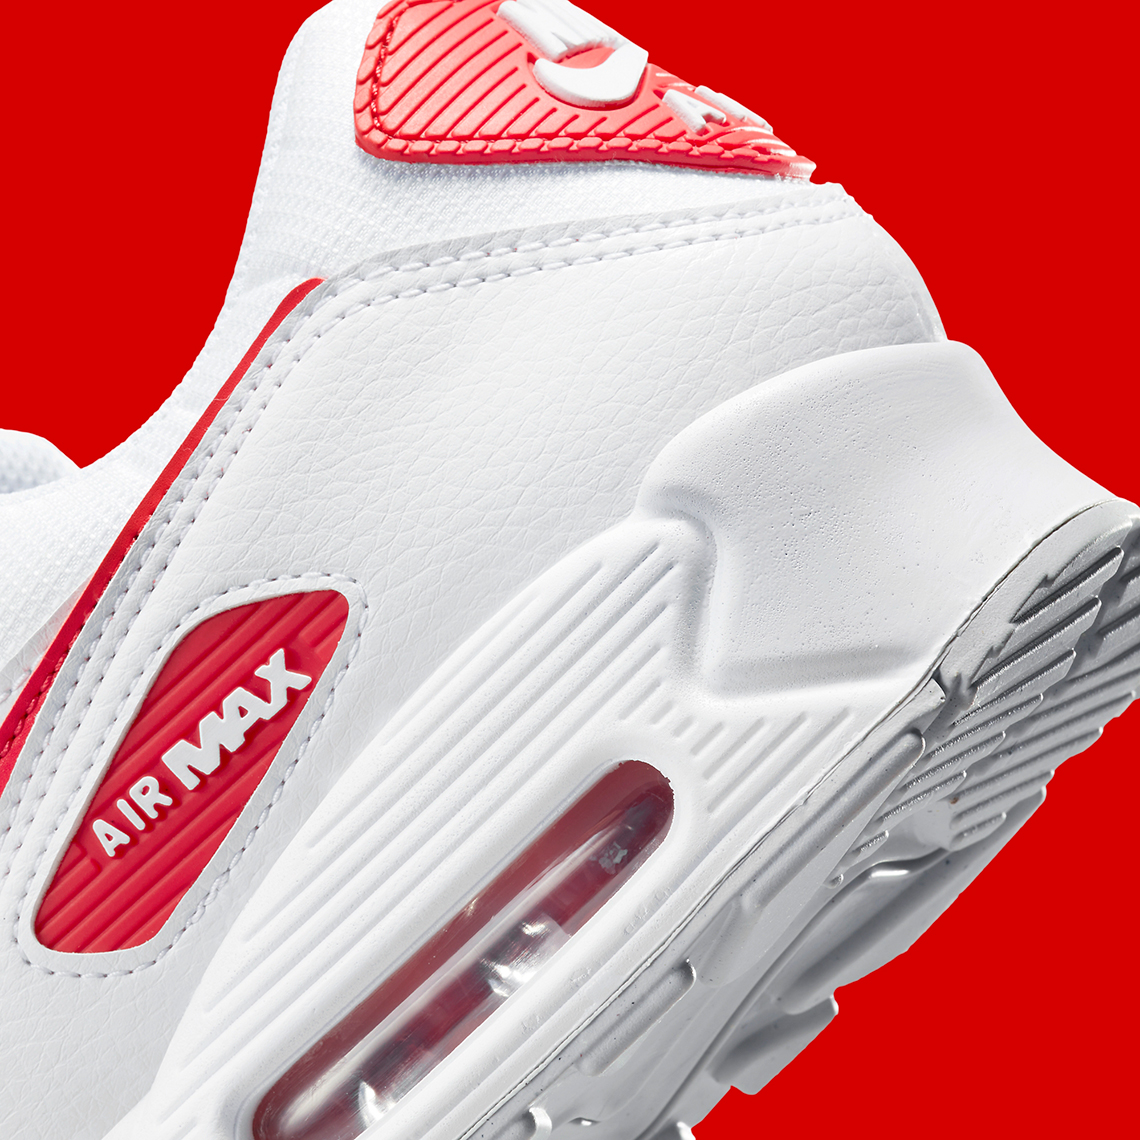 Nike Air Max 90 White Red DX8966-100 | SneakerNews.com